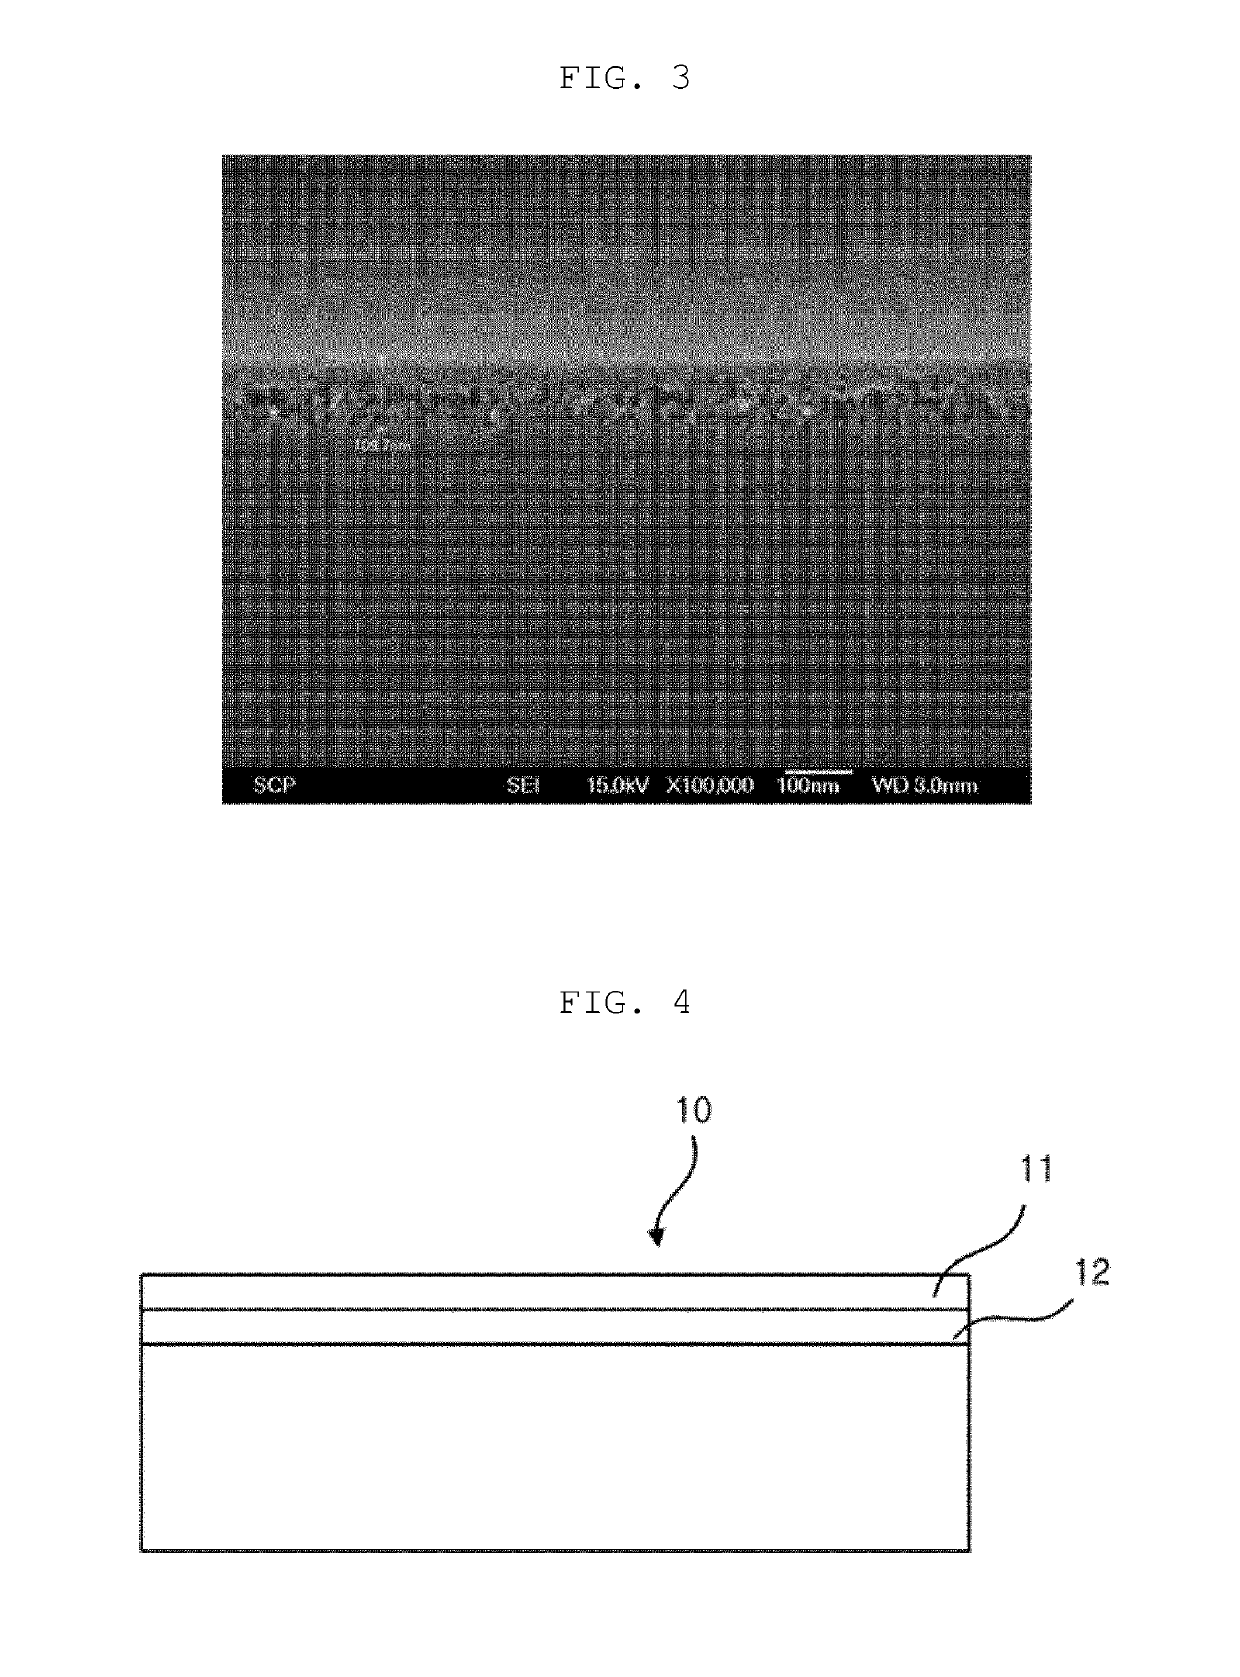 Anti-reflection glass substrate and method for manufacturing same